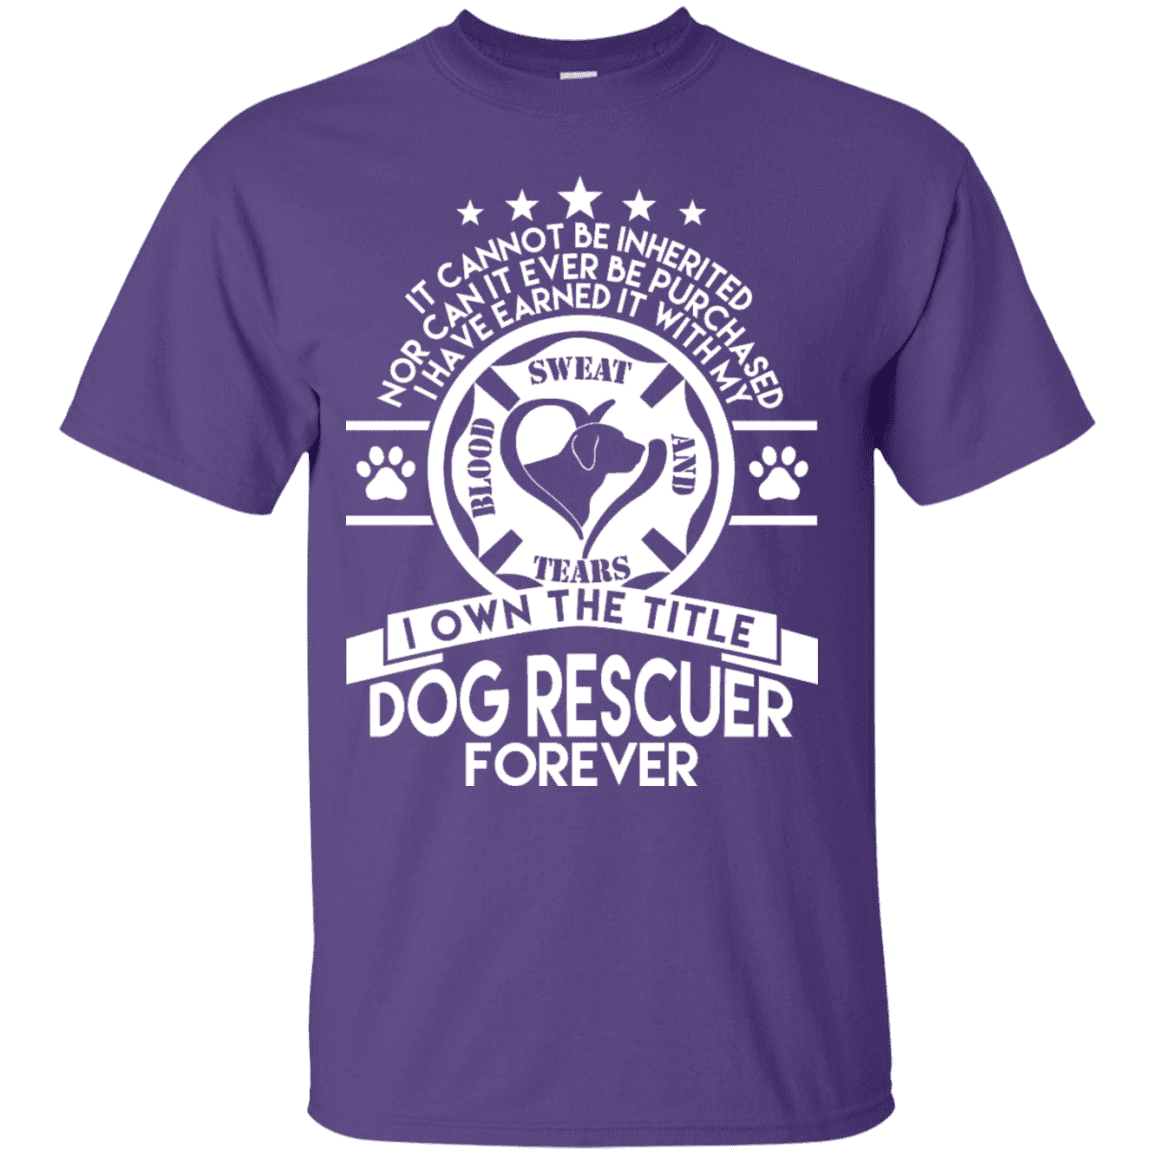 Dog Rescuer Forever - T Shirt.